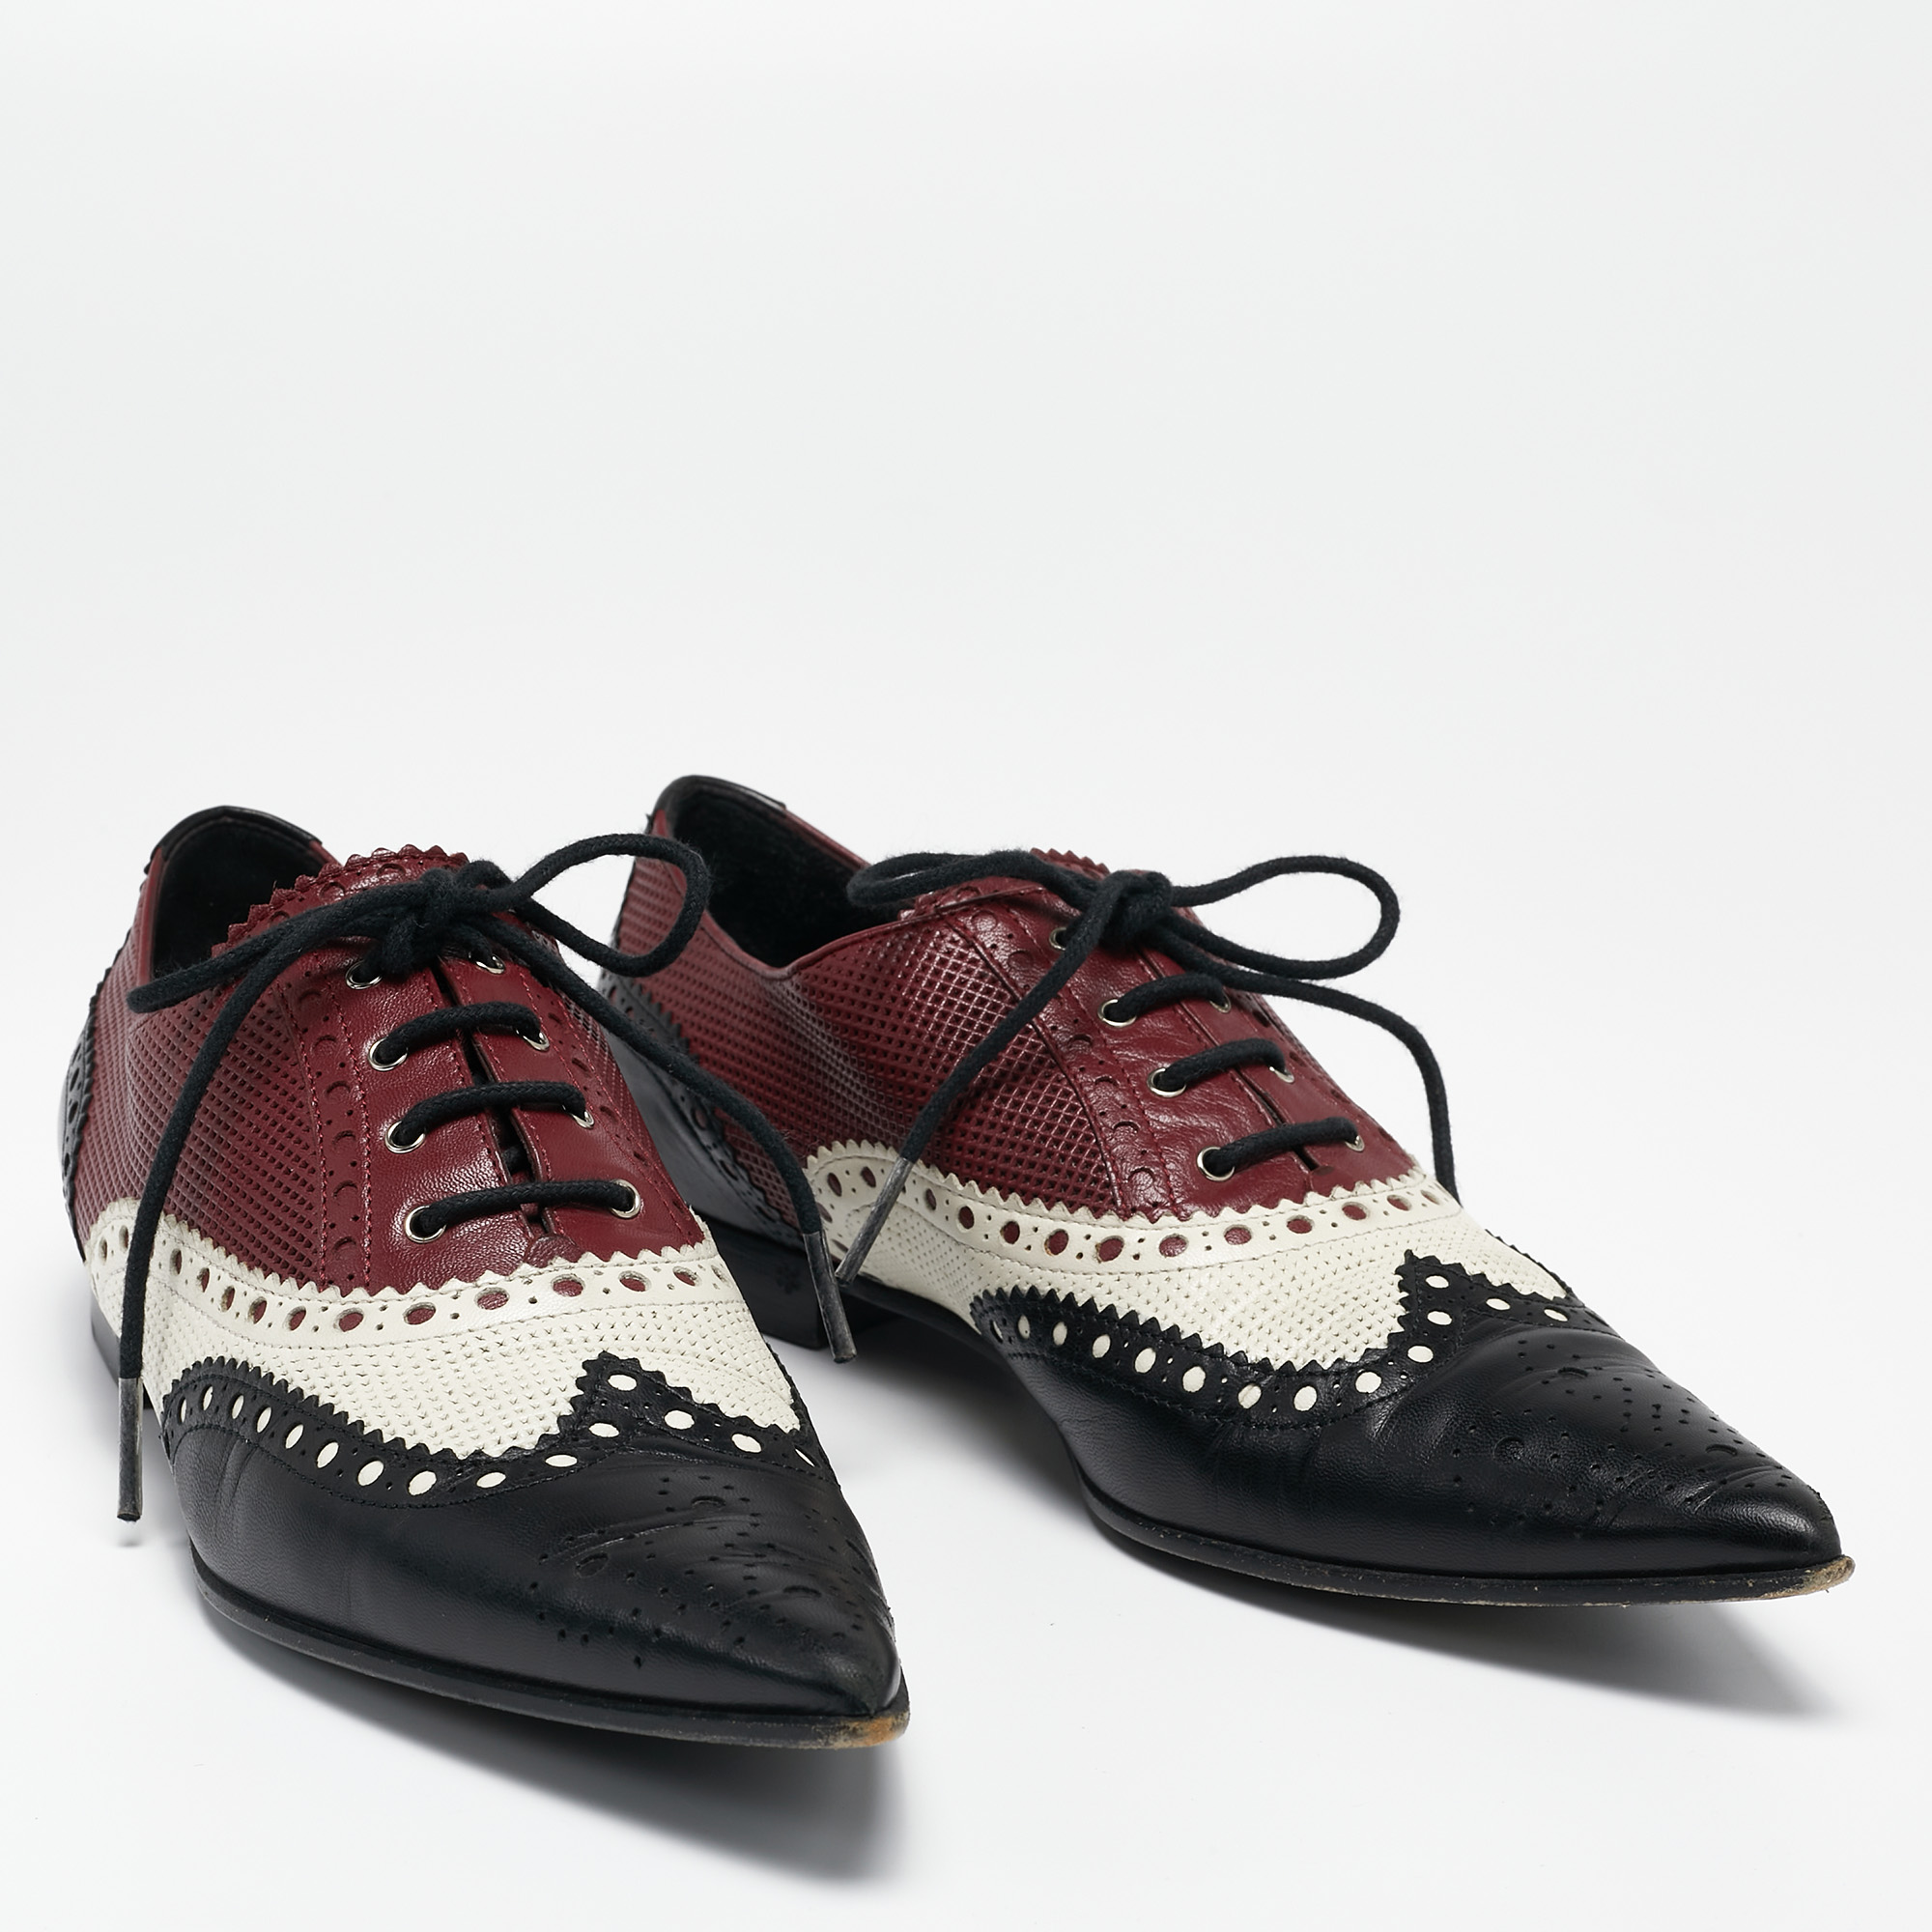 Gucci Multicolor Leather Pointed Toe Brogue Oxford Size 36